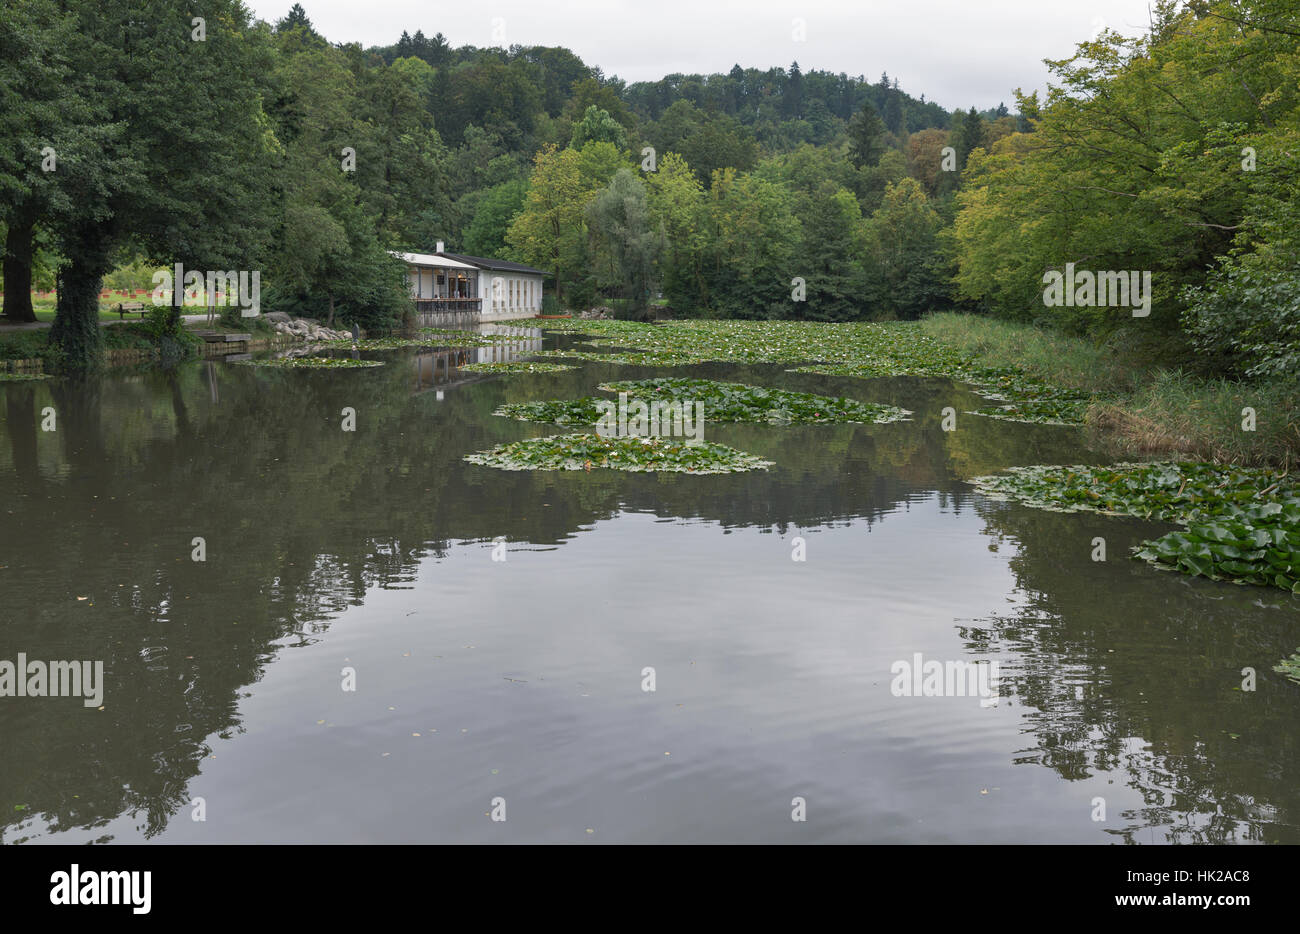 LJUBLJANA, SLOVENIA - SEPTEMBER 04, 2015: Tivoli Pond and restaurant with unrecognizable people in early autumn. View towards the north, with Roznik H Stock Photo